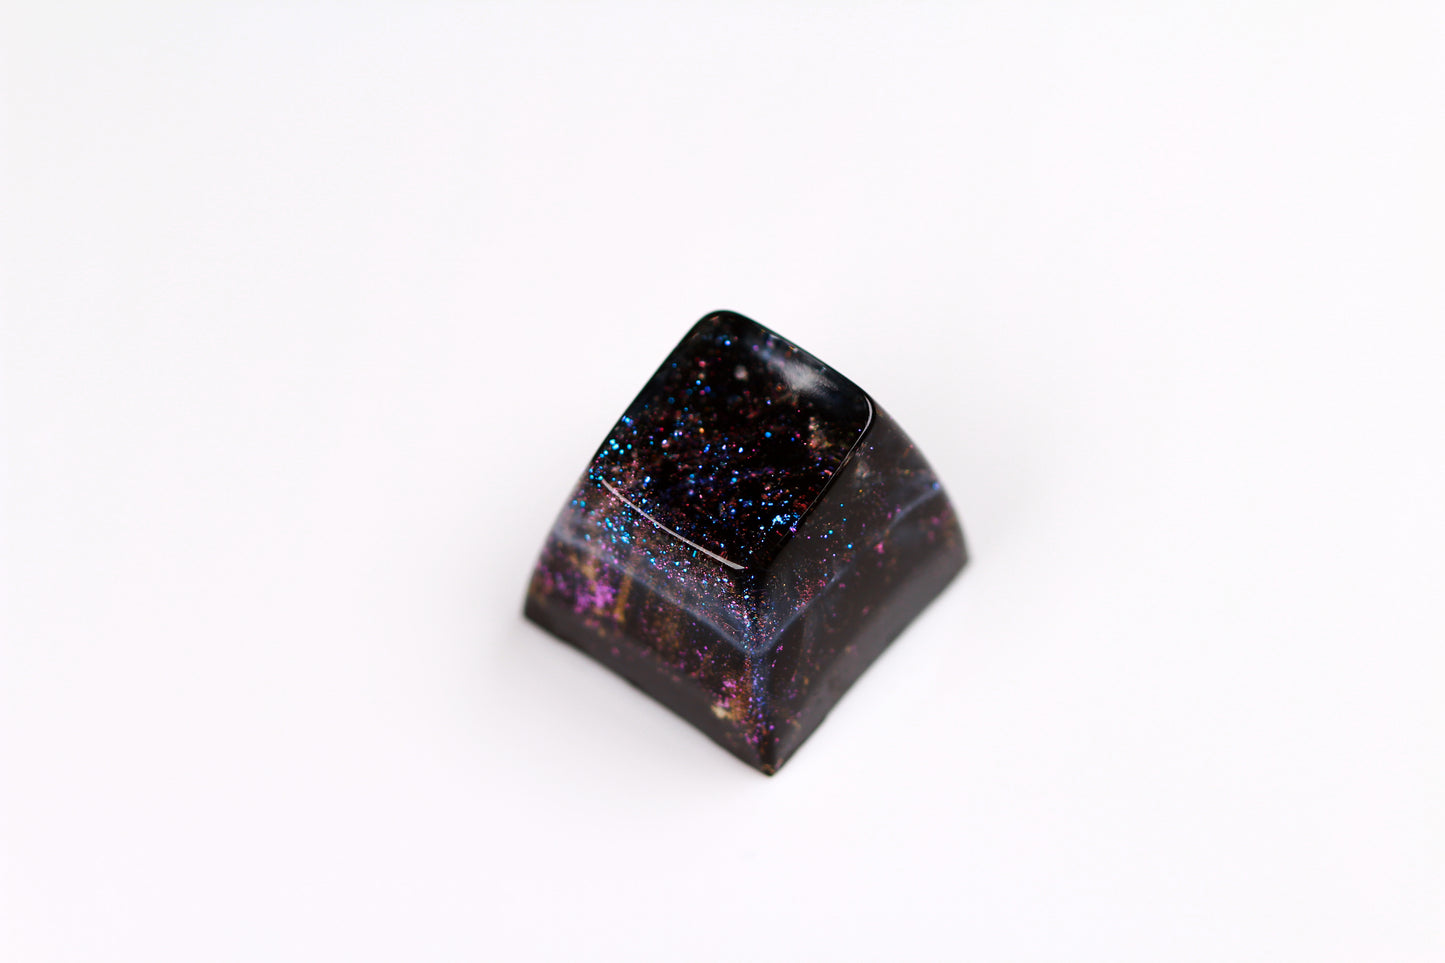 Gimpy SA Row 1 - Deep Field Particle Stream 5 - PrimeCaps Keycap - Blank and Sculpted Artisan Keycaps for cherry MX mechanical keyboards 